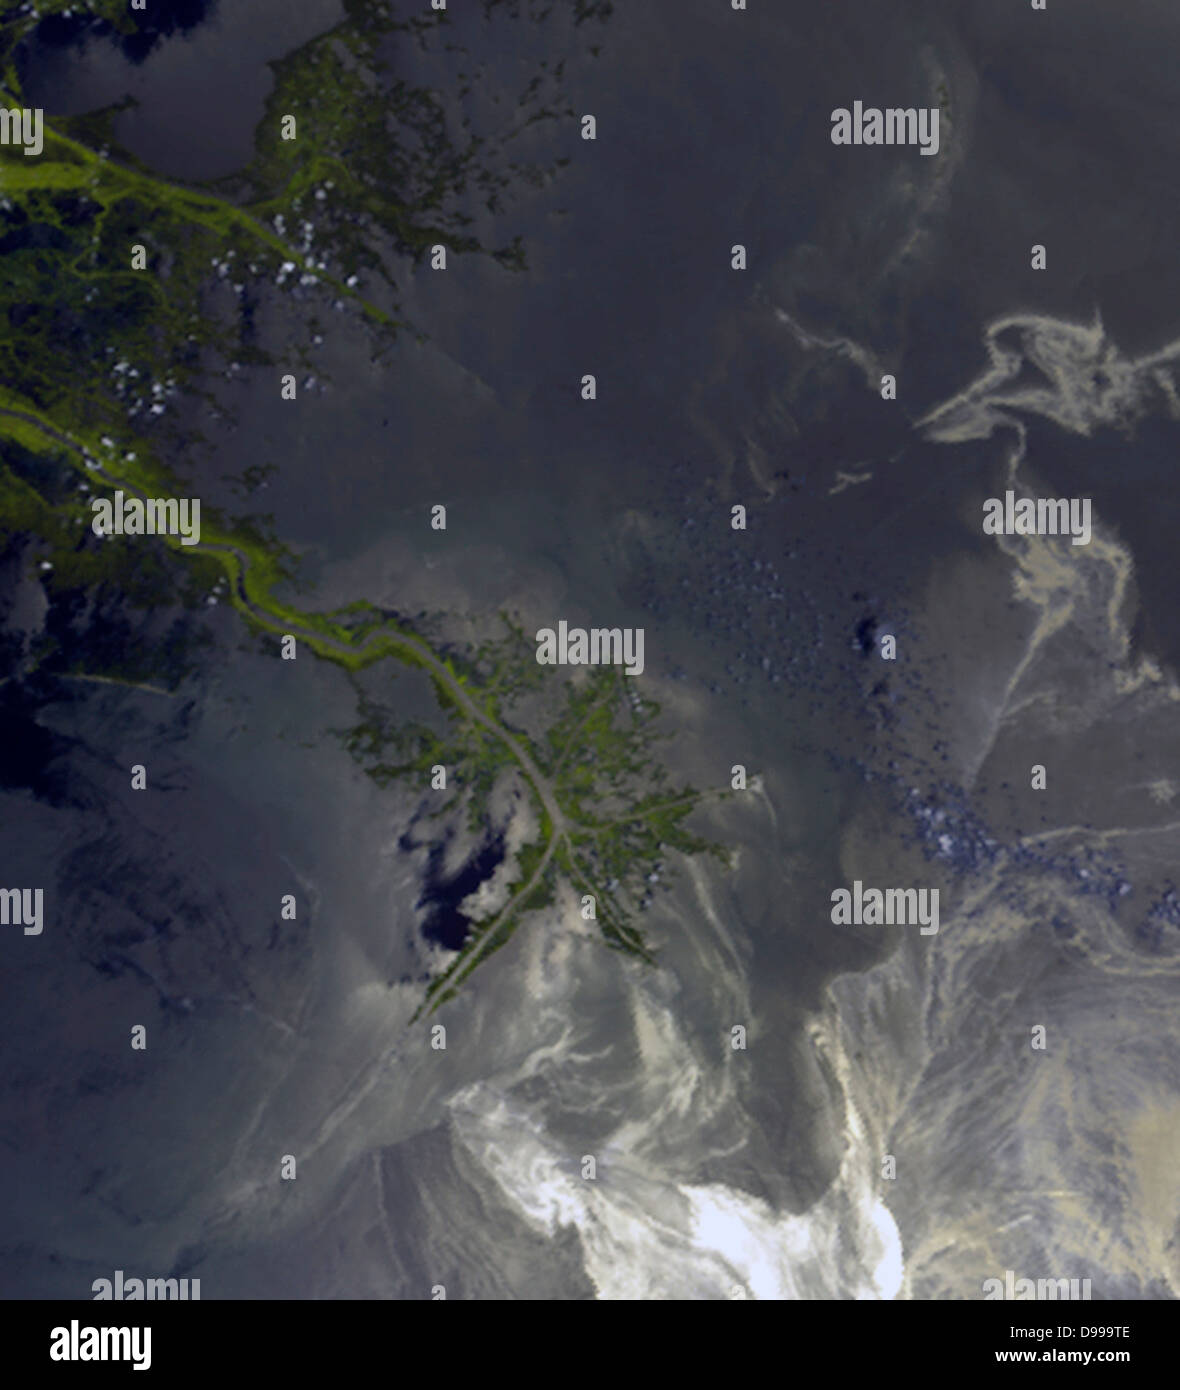 This image, acquired on May 24, 2010 shows oil from the former Deepwater Horizon rig encroaching upon several of Louisiana's wildlife habitats. The source of the spill is located off the southeastern (bottom right) edge of the image. Satellite image. Stock Photo